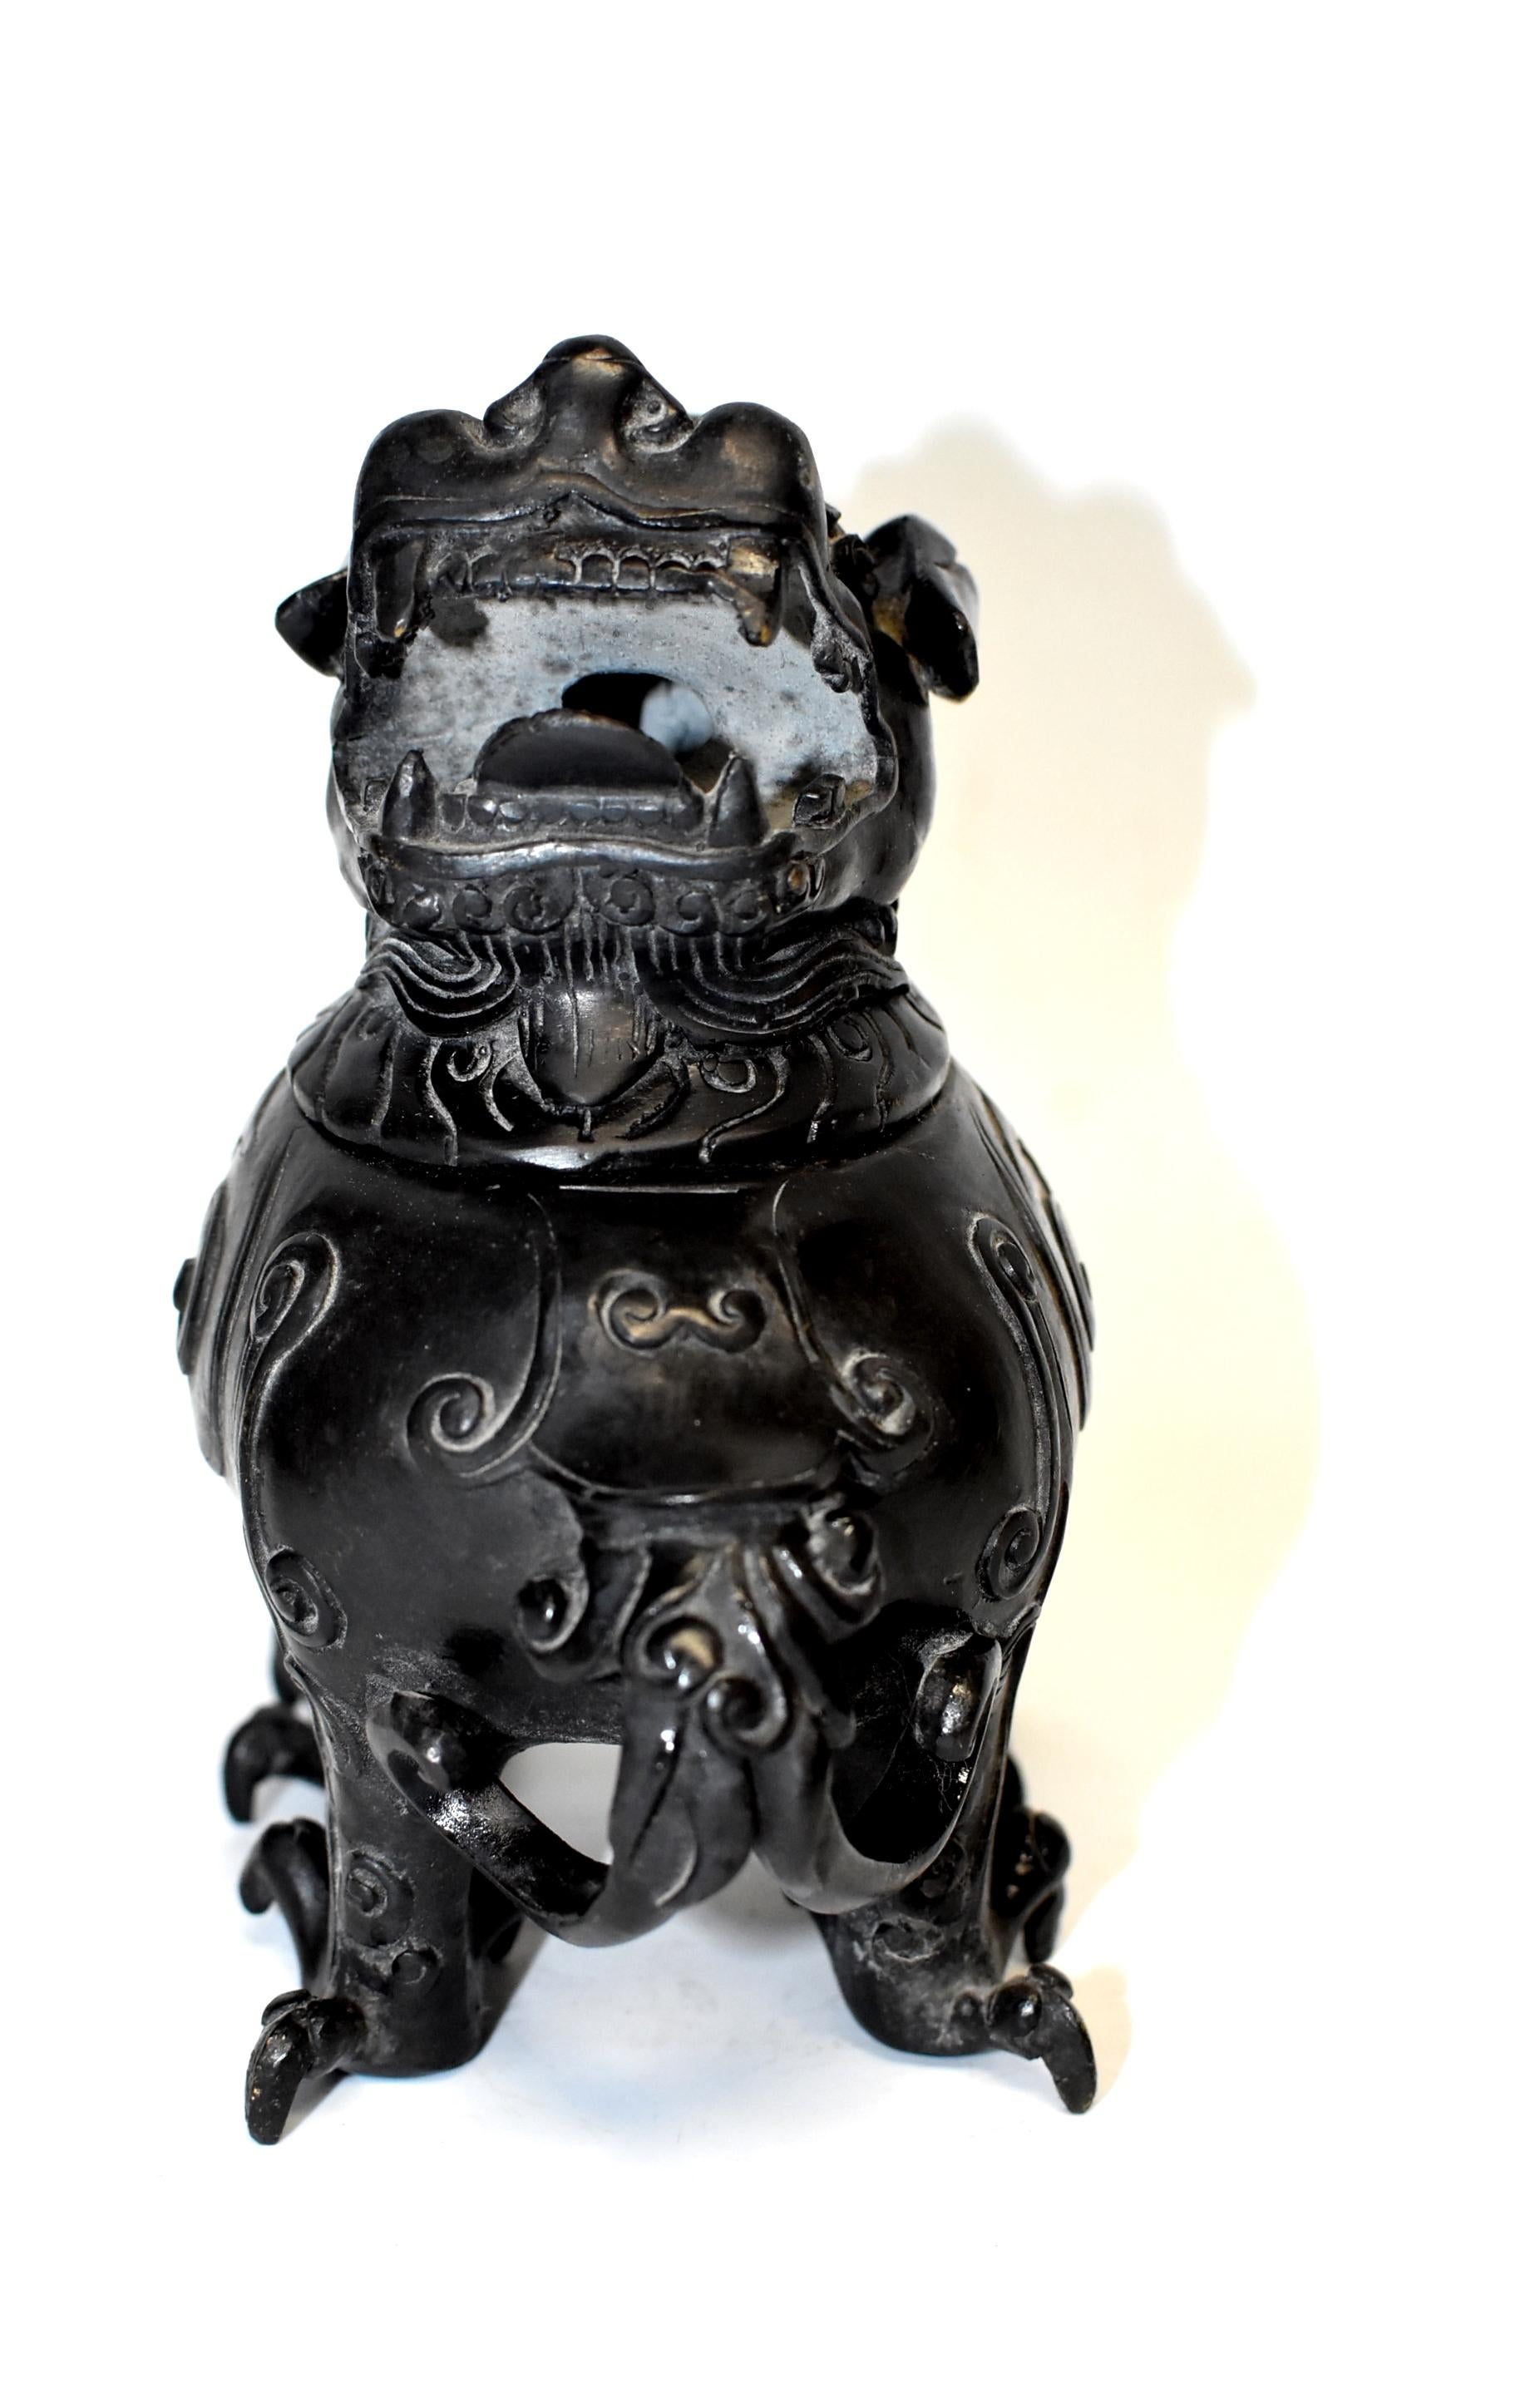 A unique beast form incense burner in an ancient design. The beast's head makes the lid while its 4 legs and paws stabilize the pot. Romantic, exotic scrolls decorate the body. Open mouth allows the perfumed air to escape. Refined craftsmanship.